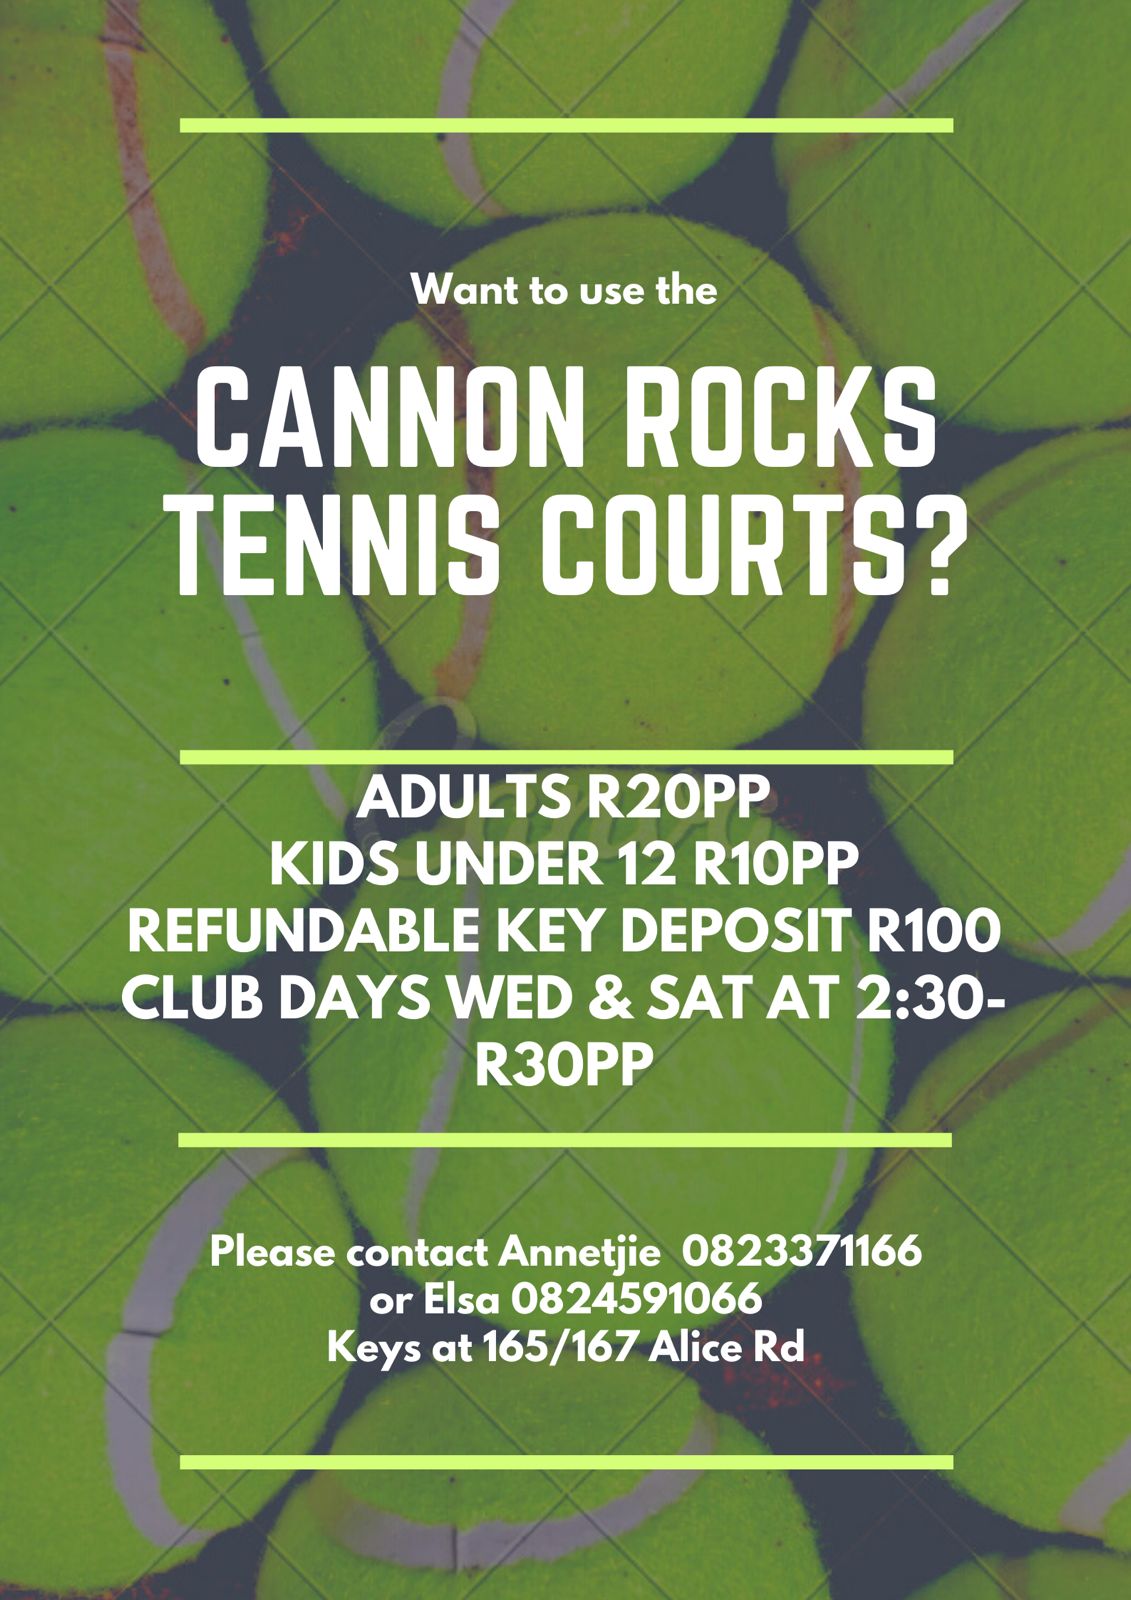 Tennis courts usage poster with prices